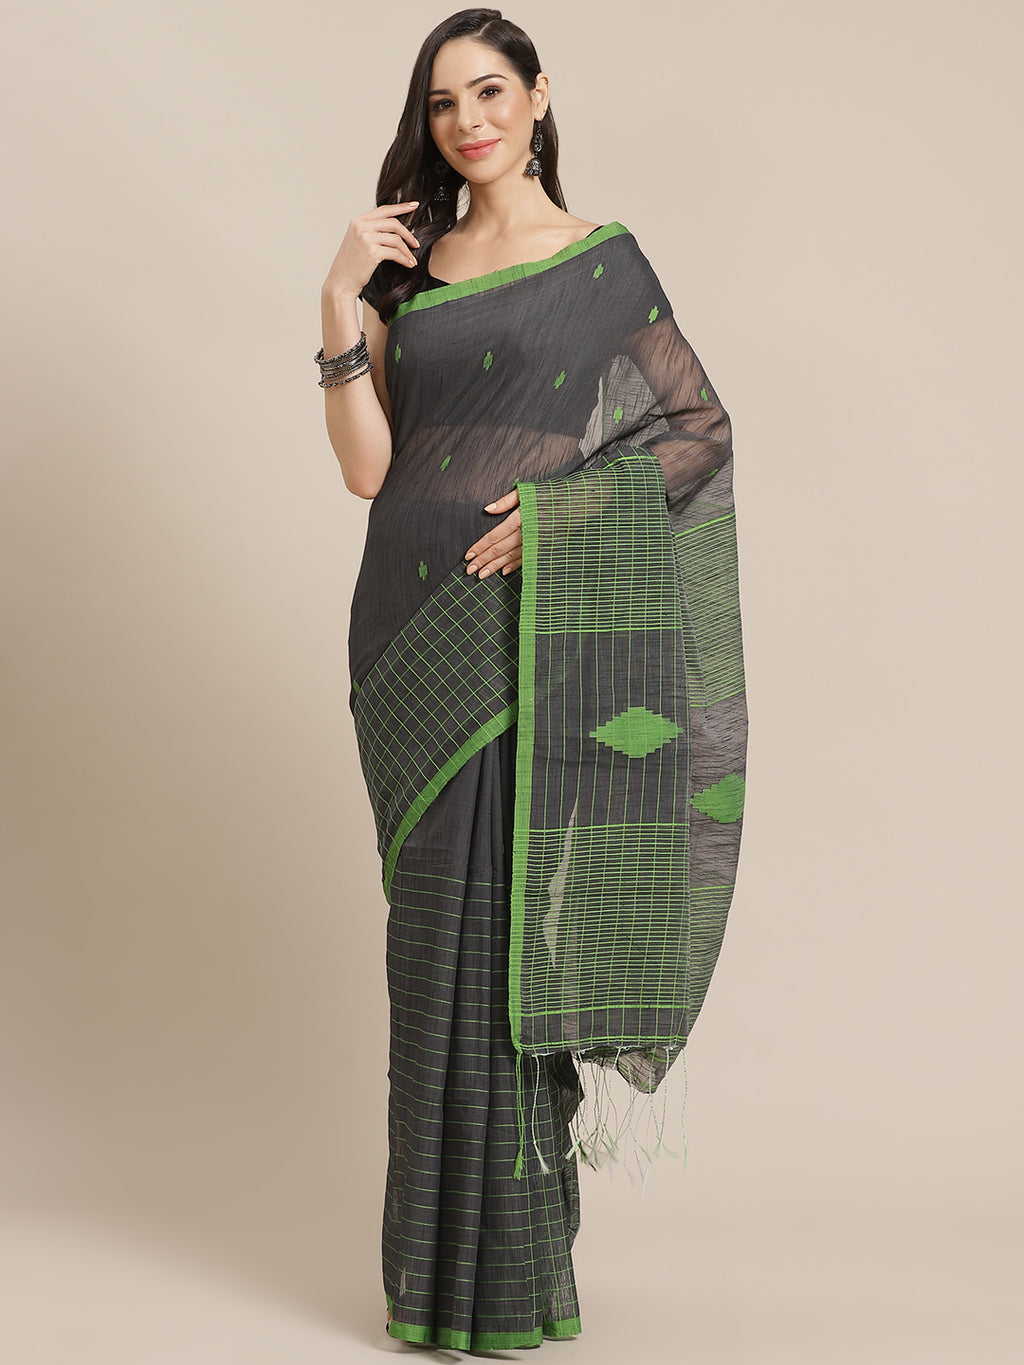 Grey and Green, Kalakari India Ikat Silk Cotton Woven Design Saree with Blouse SHBESA0033-Saree-Kalakari India-SHBESA0033-Bengal, Cotton, Geographical Indication, Hand Crafted, Heritage Prints, Ikkat, Natural Dyes, Red, Sarees, Sustainable Fabrics, Woven, Yellow-[Linen,Ethnic,wear,Fashionista,Handloom,Handicraft,Indigo,blockprint,block,print,Cotton,Chanderi,Blue, latest,classy,party,bollywood,trendy,summer,style,traditional,formal,elegant,unique,style,hand,block,print, dabu,booti,gift,present,gl